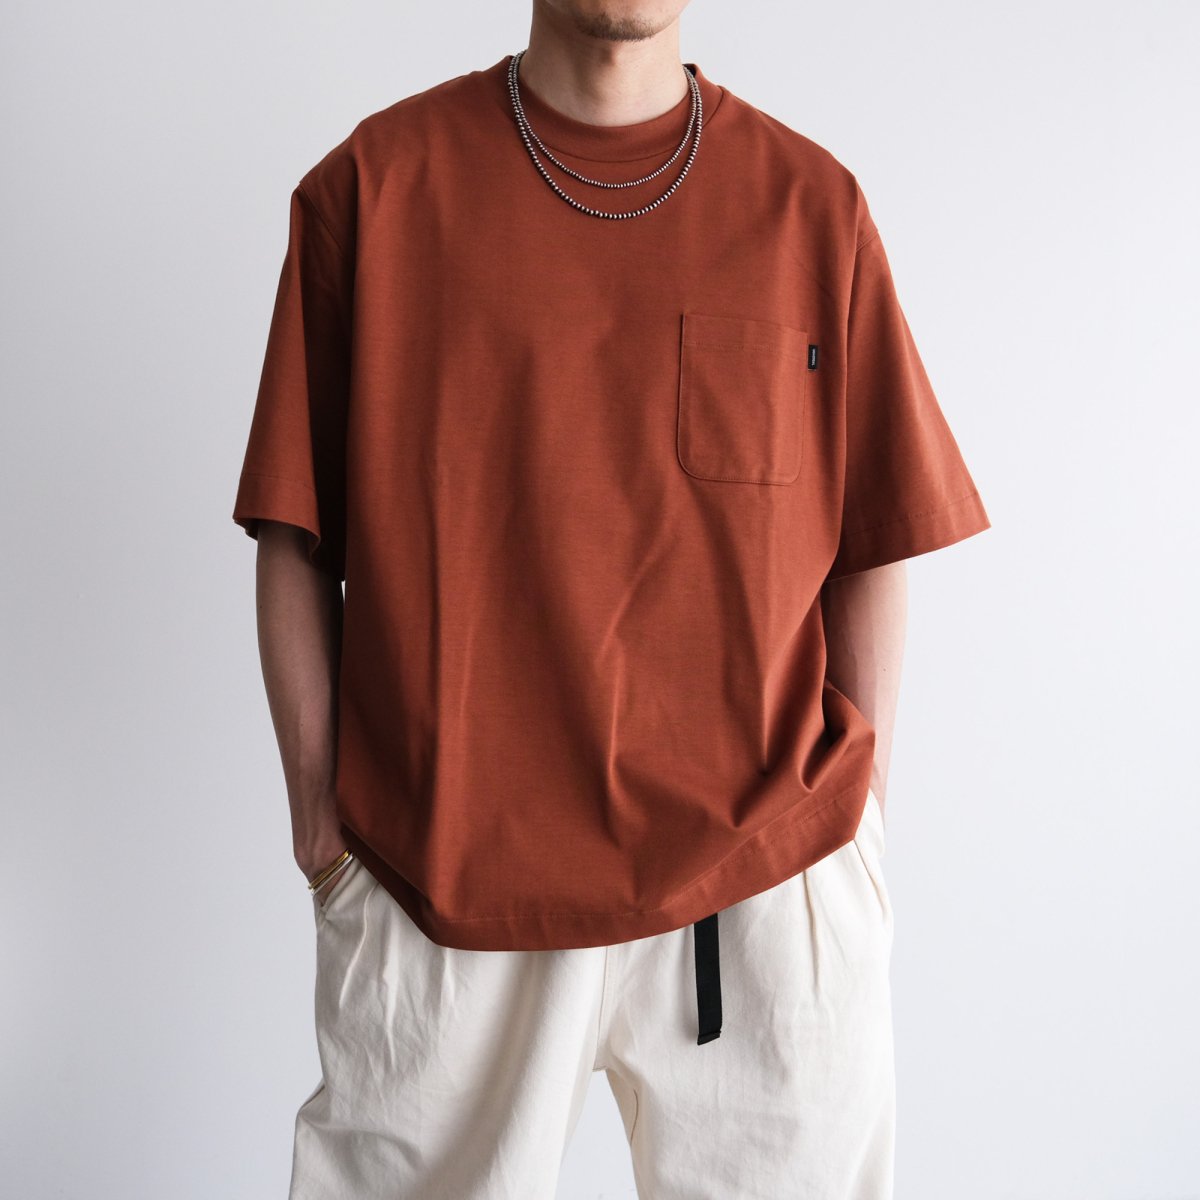 UNIVERSAL PRODUCTS『PIS NAME S/S T-SHIRT』30%OFF<img class='new_mark_img2' src='https://img.shop-pro.jp/img/new/icons20.gif' style='border:none;display:inline;margin:0px;padding:0px;width:auto;' />